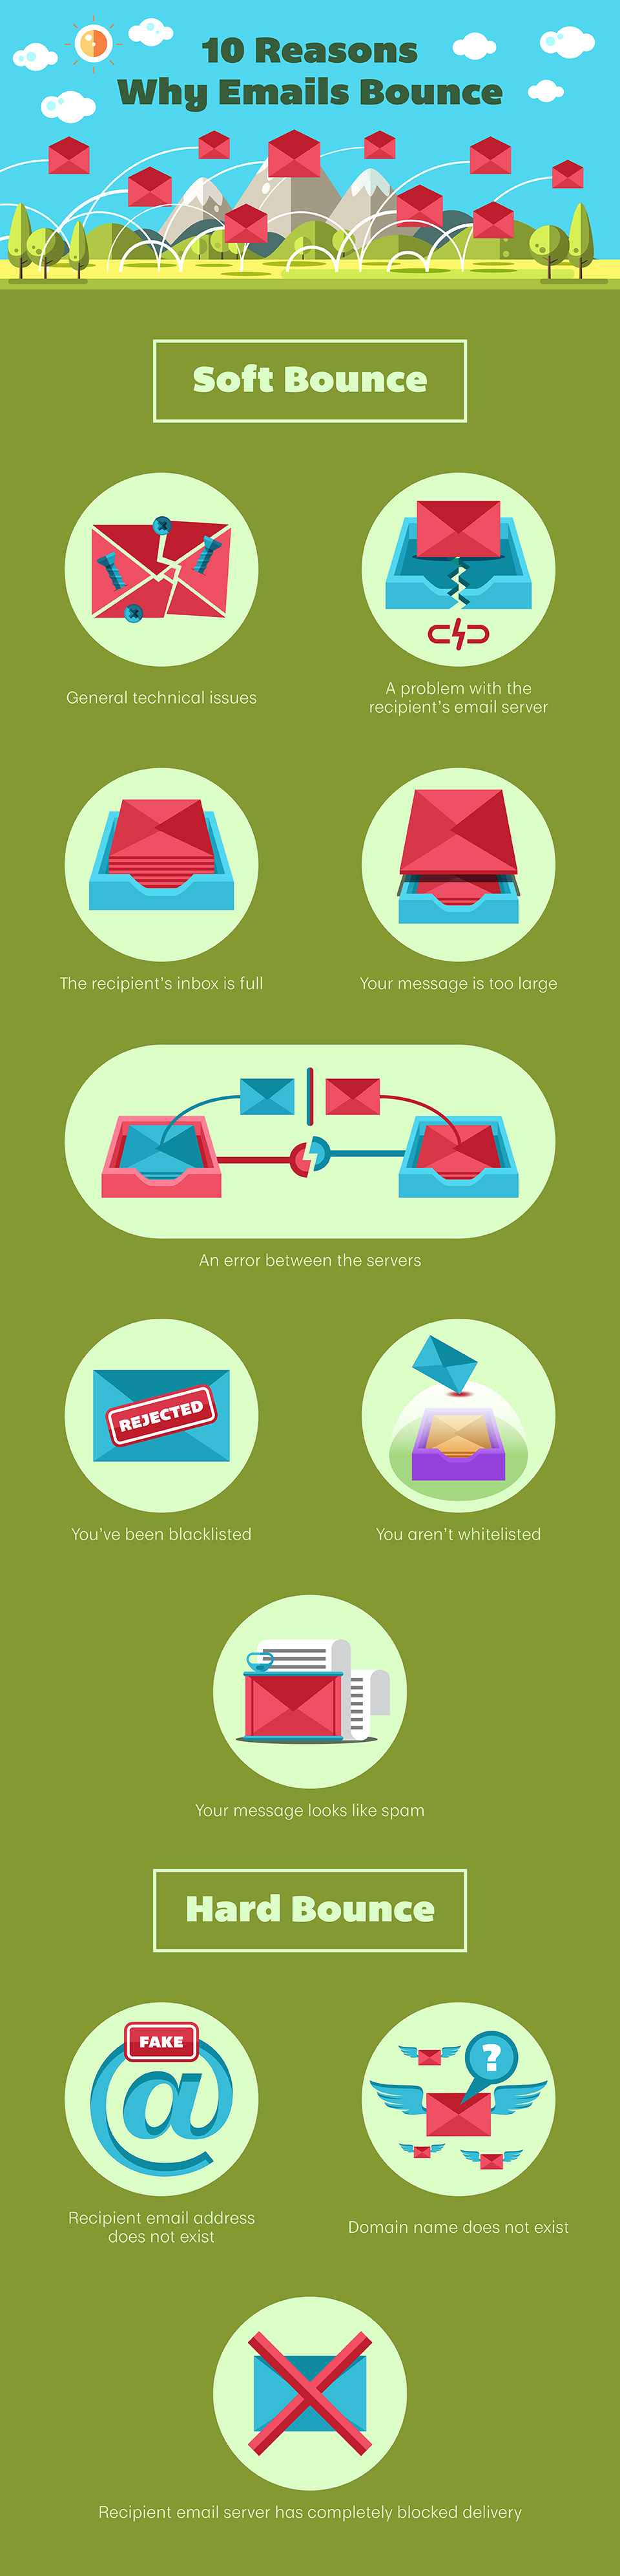 10-reasons-why-emails-bounce-infographic